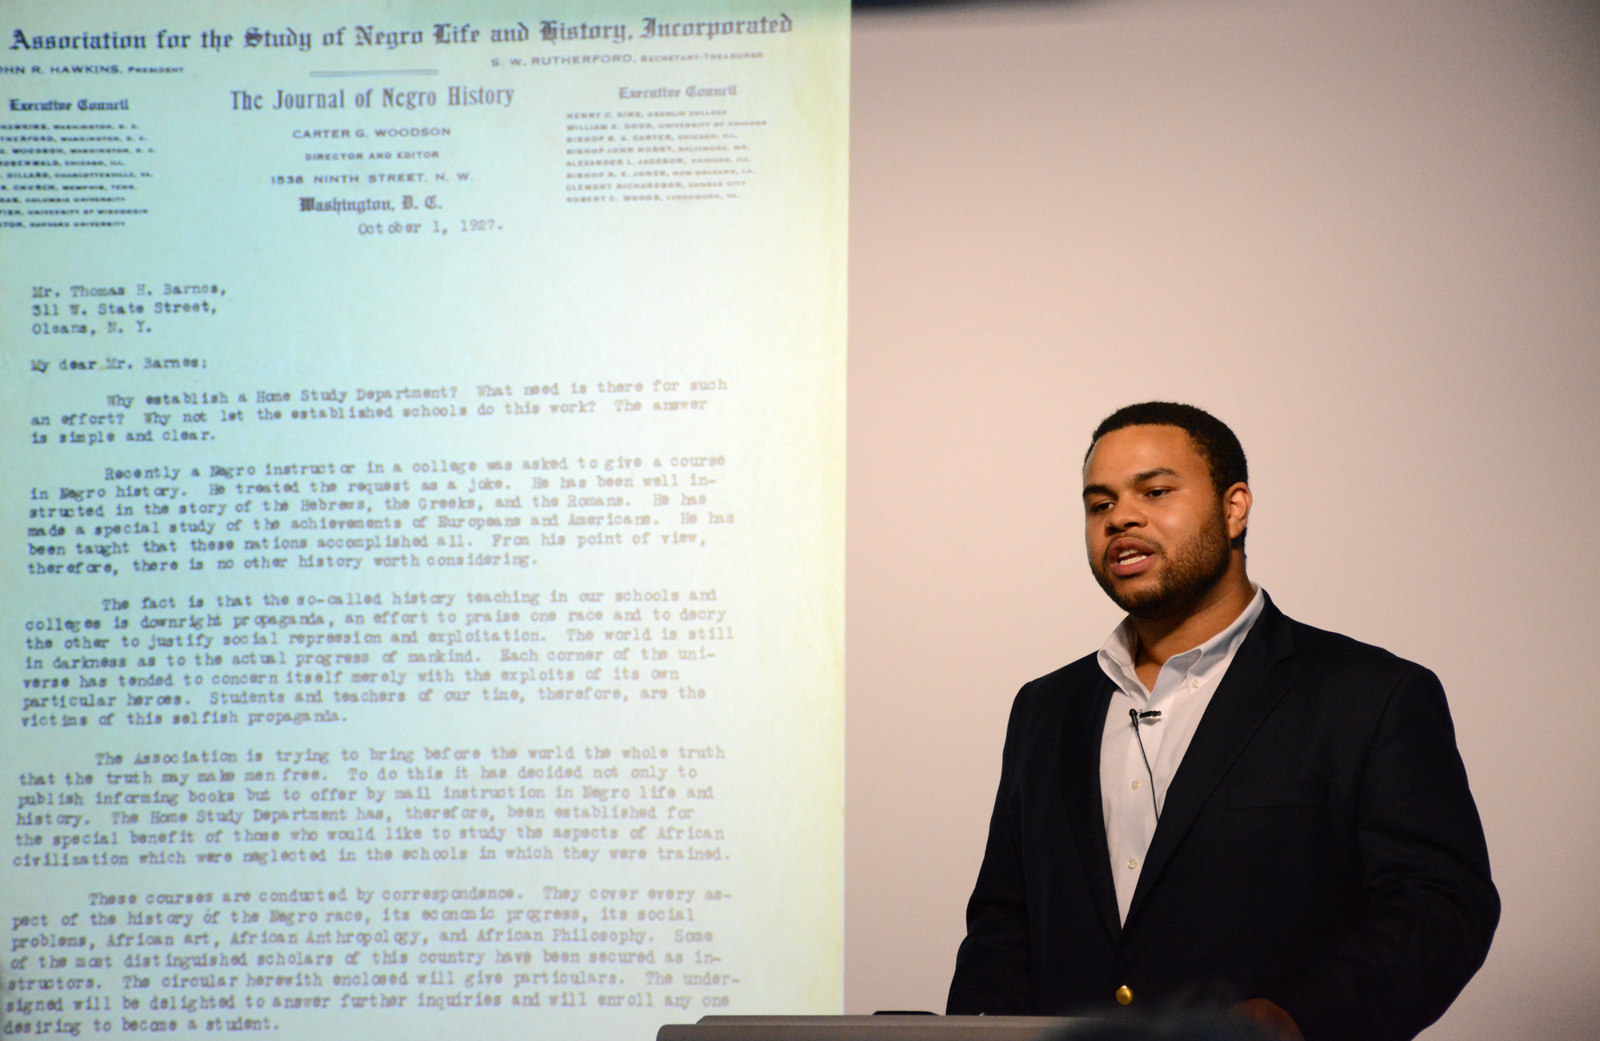 MALS Student Curates Pop-up Exhibit on Letters from African-American Leaders